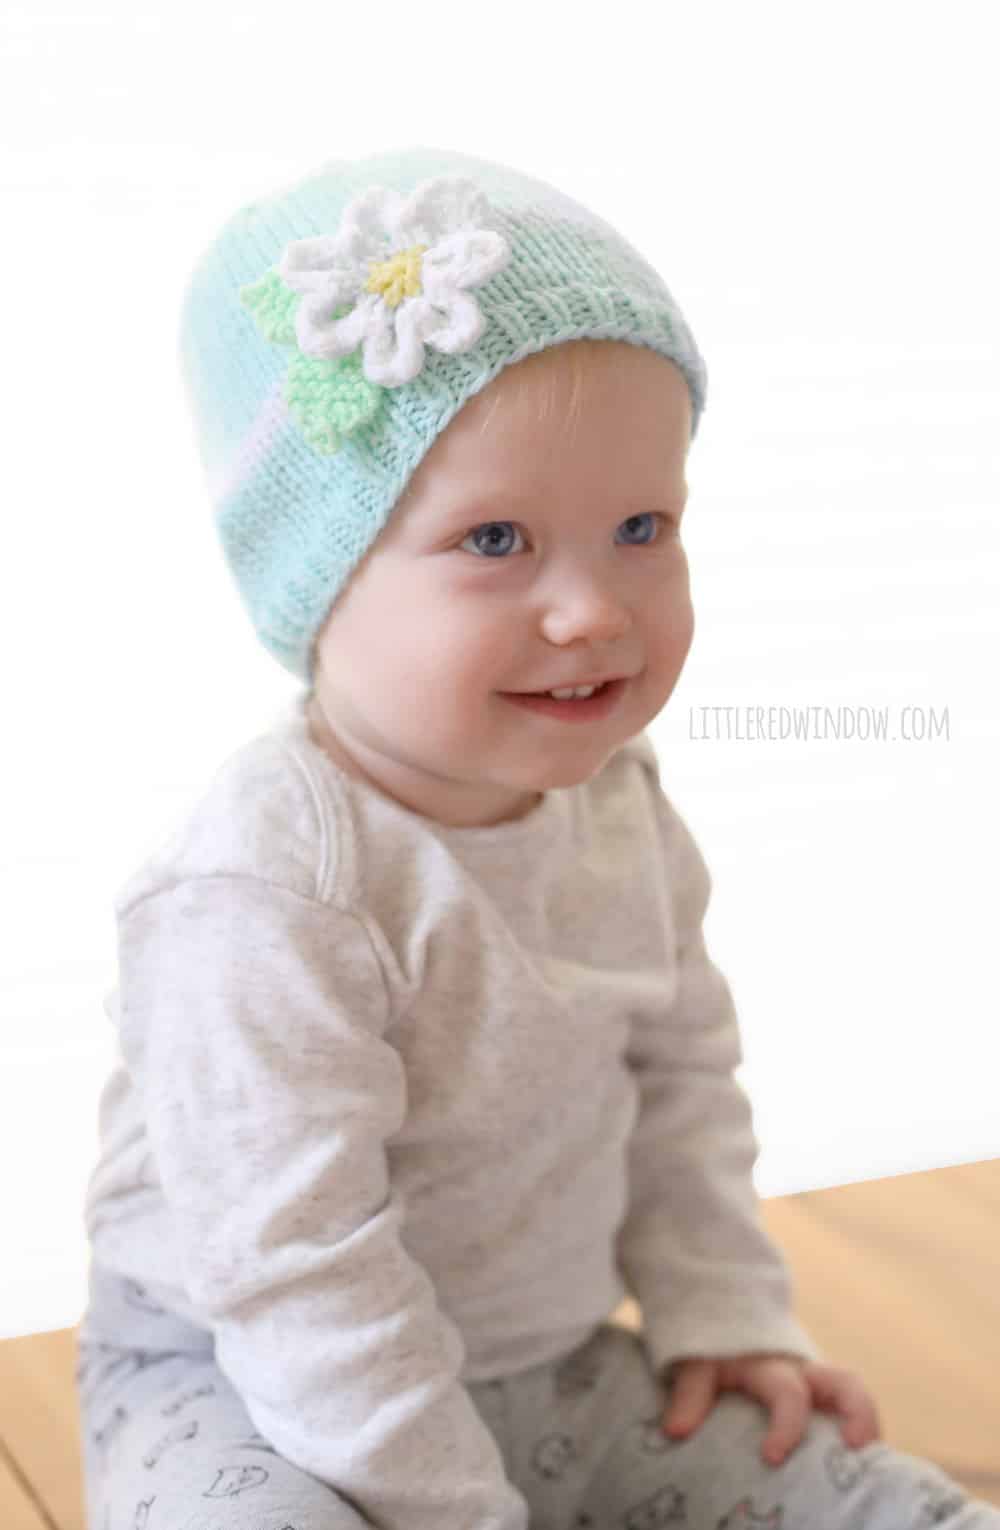 Spring Daisy Hat Knitting Pattern for newborns, babies and toddlers! | littleredwindow.com